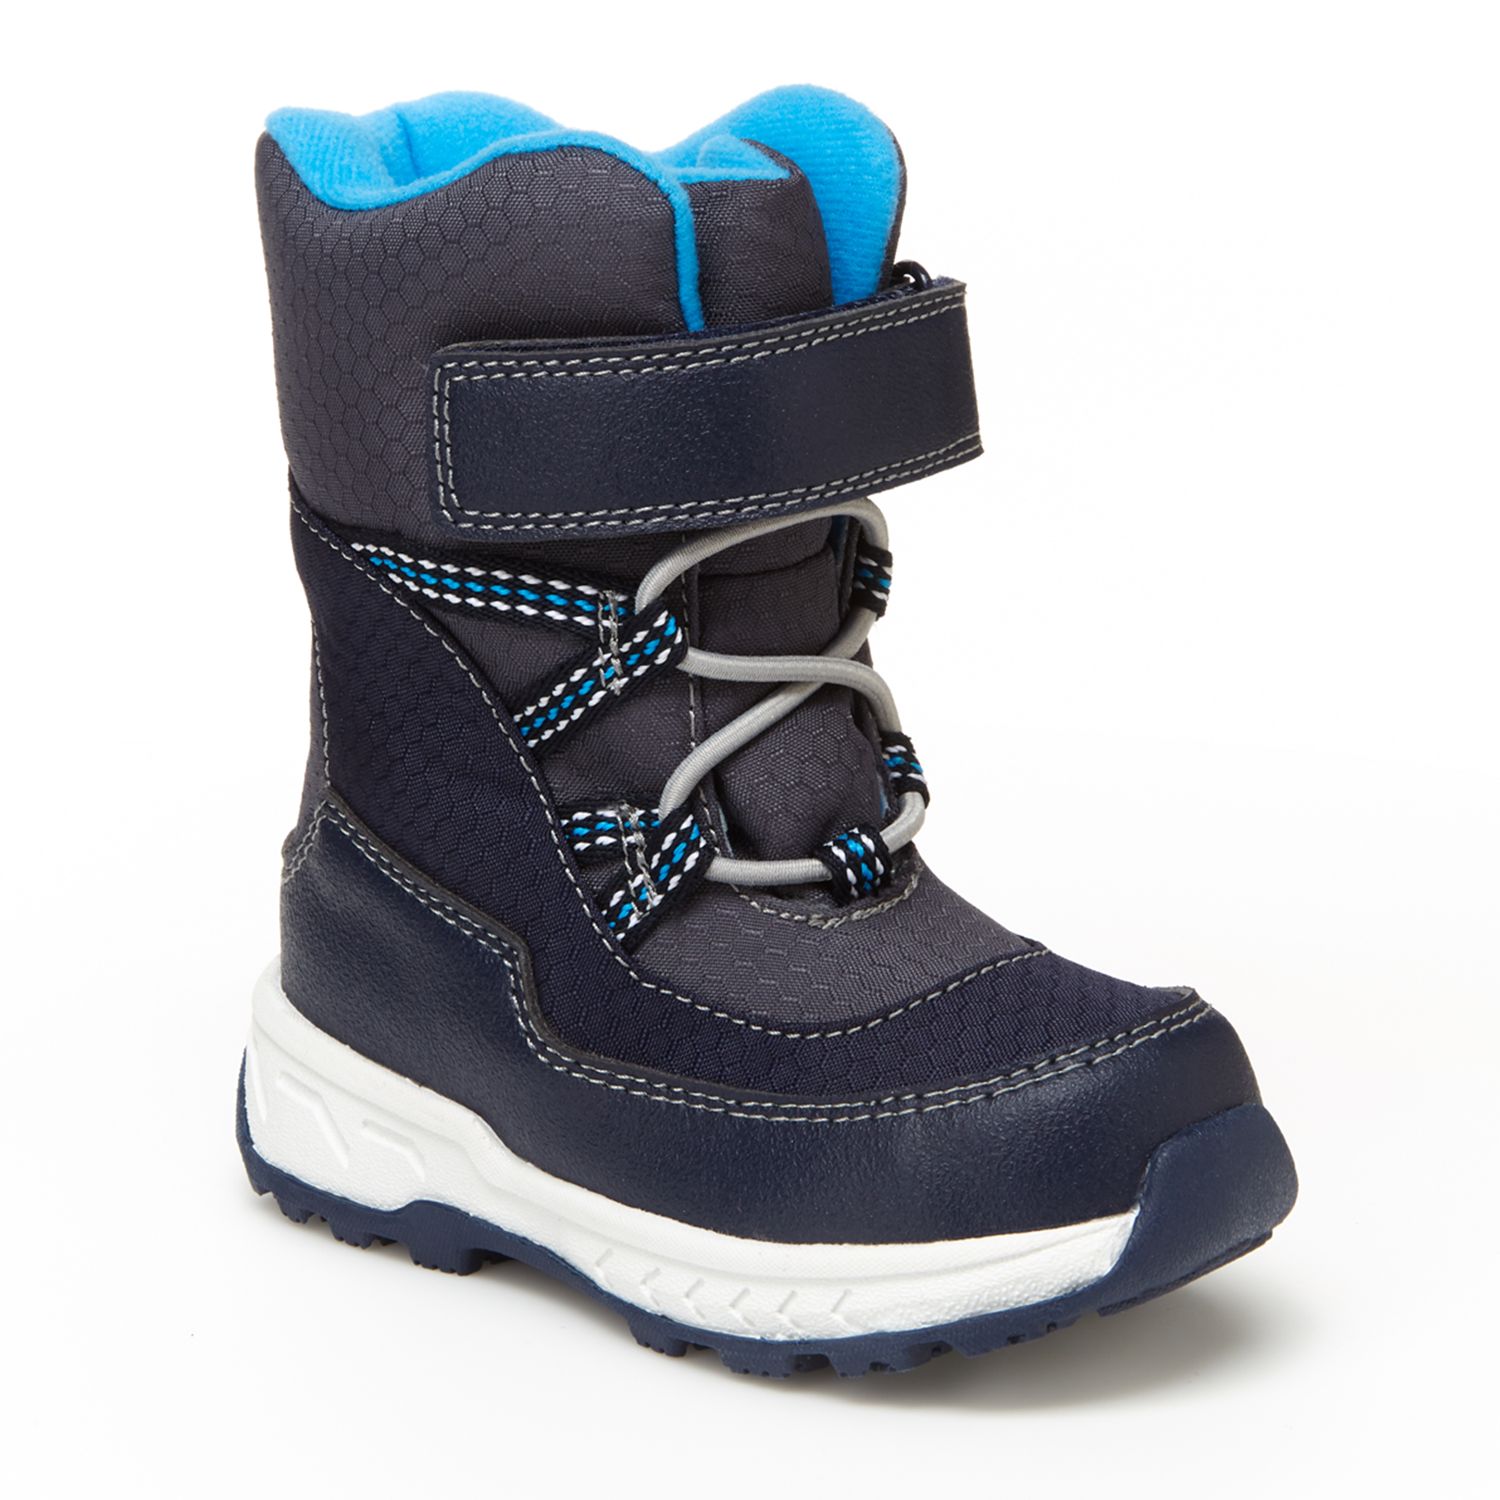 snow boots water resistant